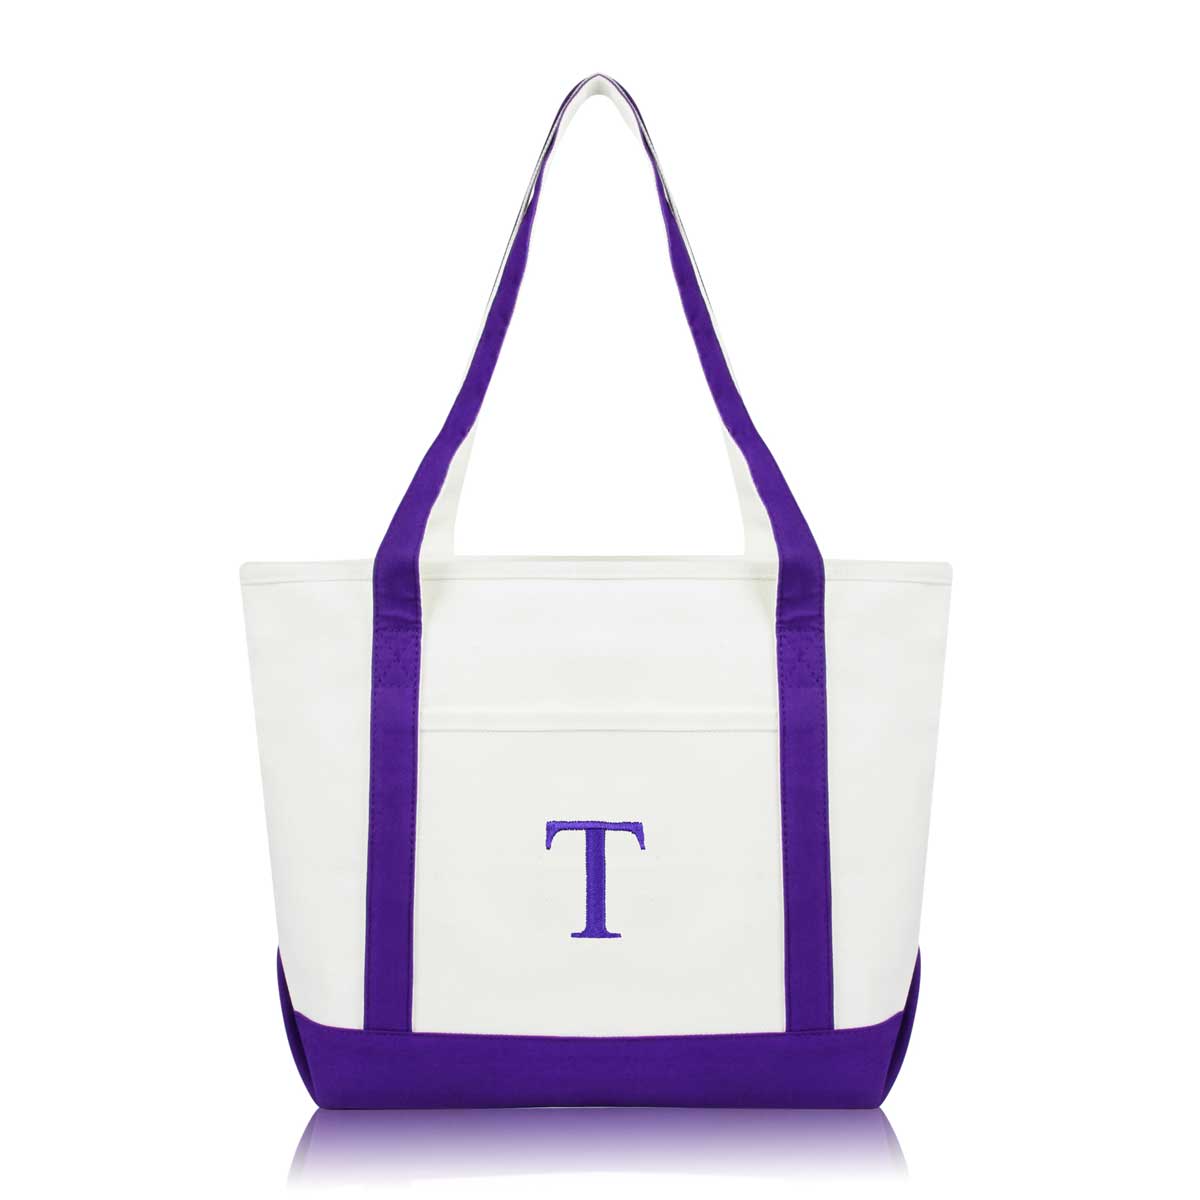 Dalix Medium Personalized Tote Bag Monogrammed Initial Letter - T